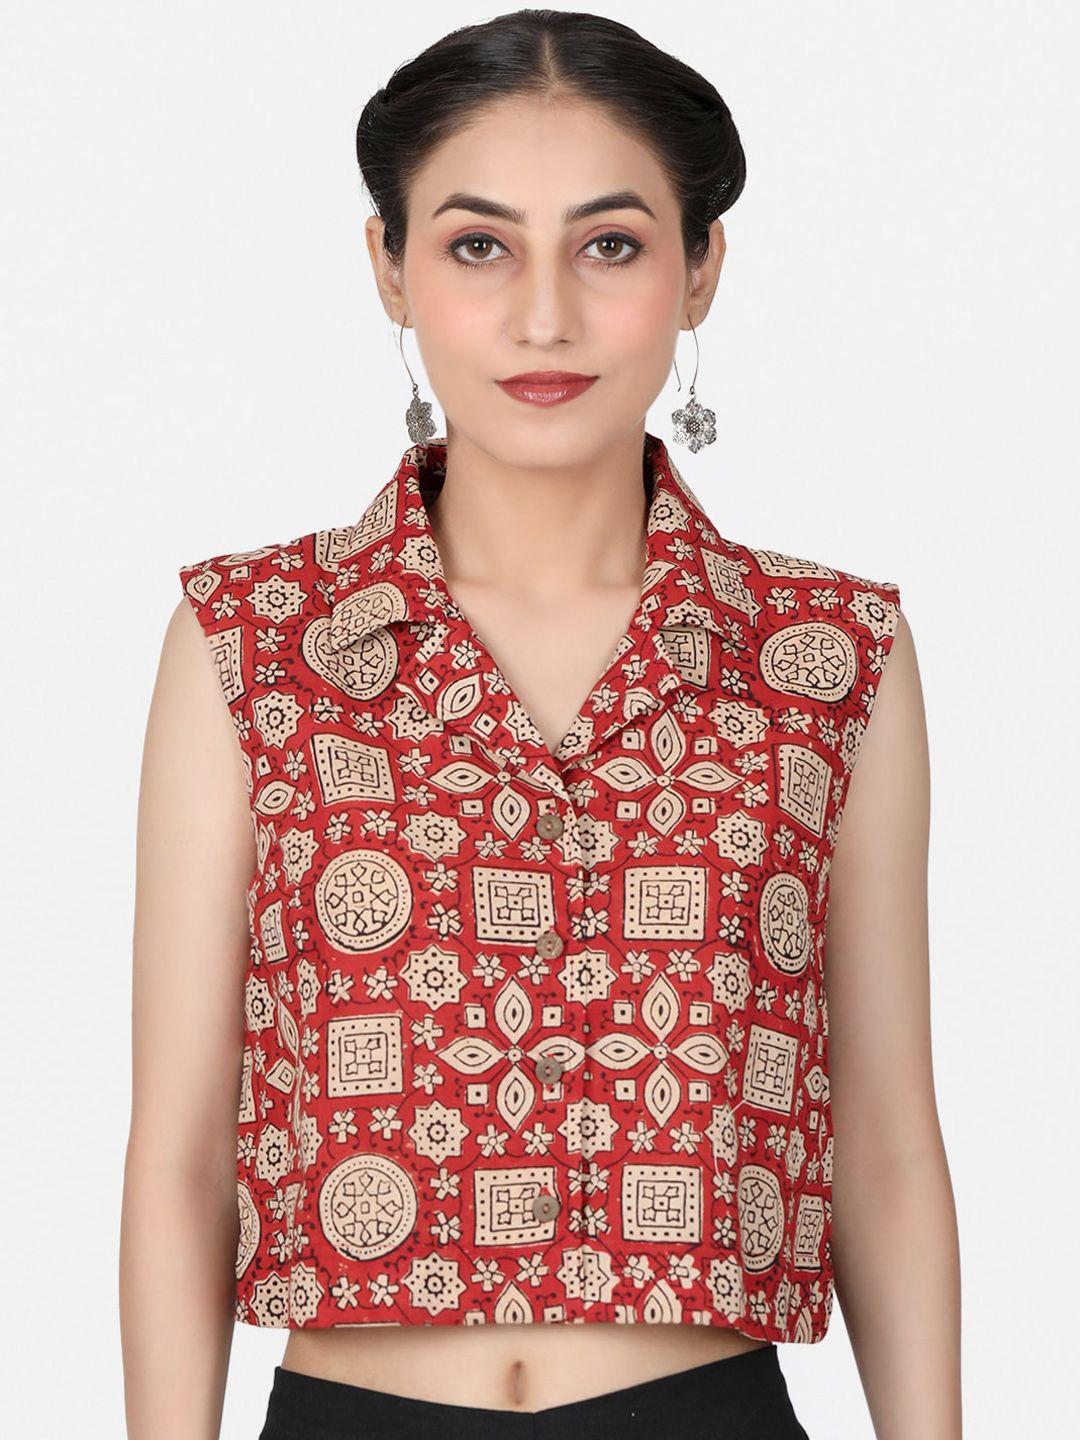 llajja printed pure cotton ready to wear non padded saree blouse